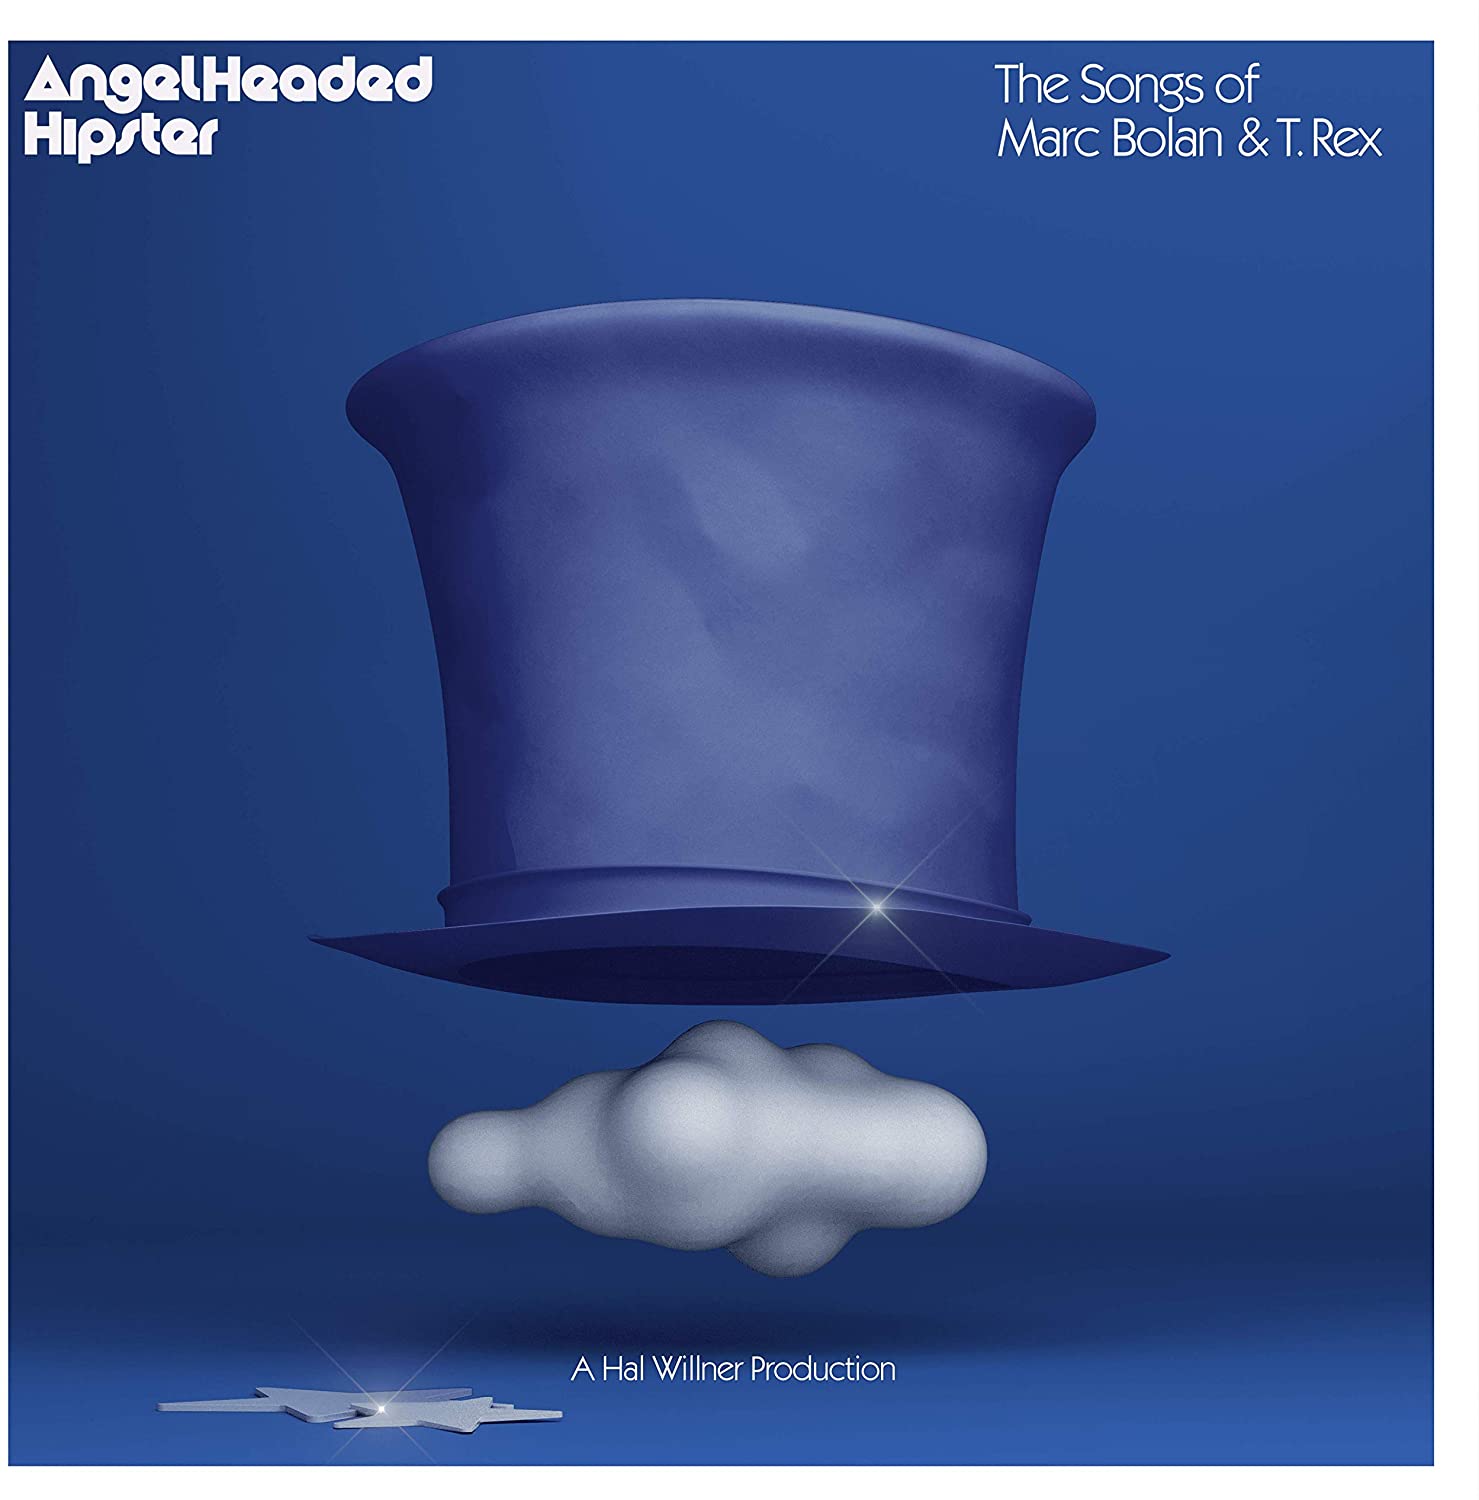 Angelheaded Hipster: The Songs of Marc Bolan and T. Rex